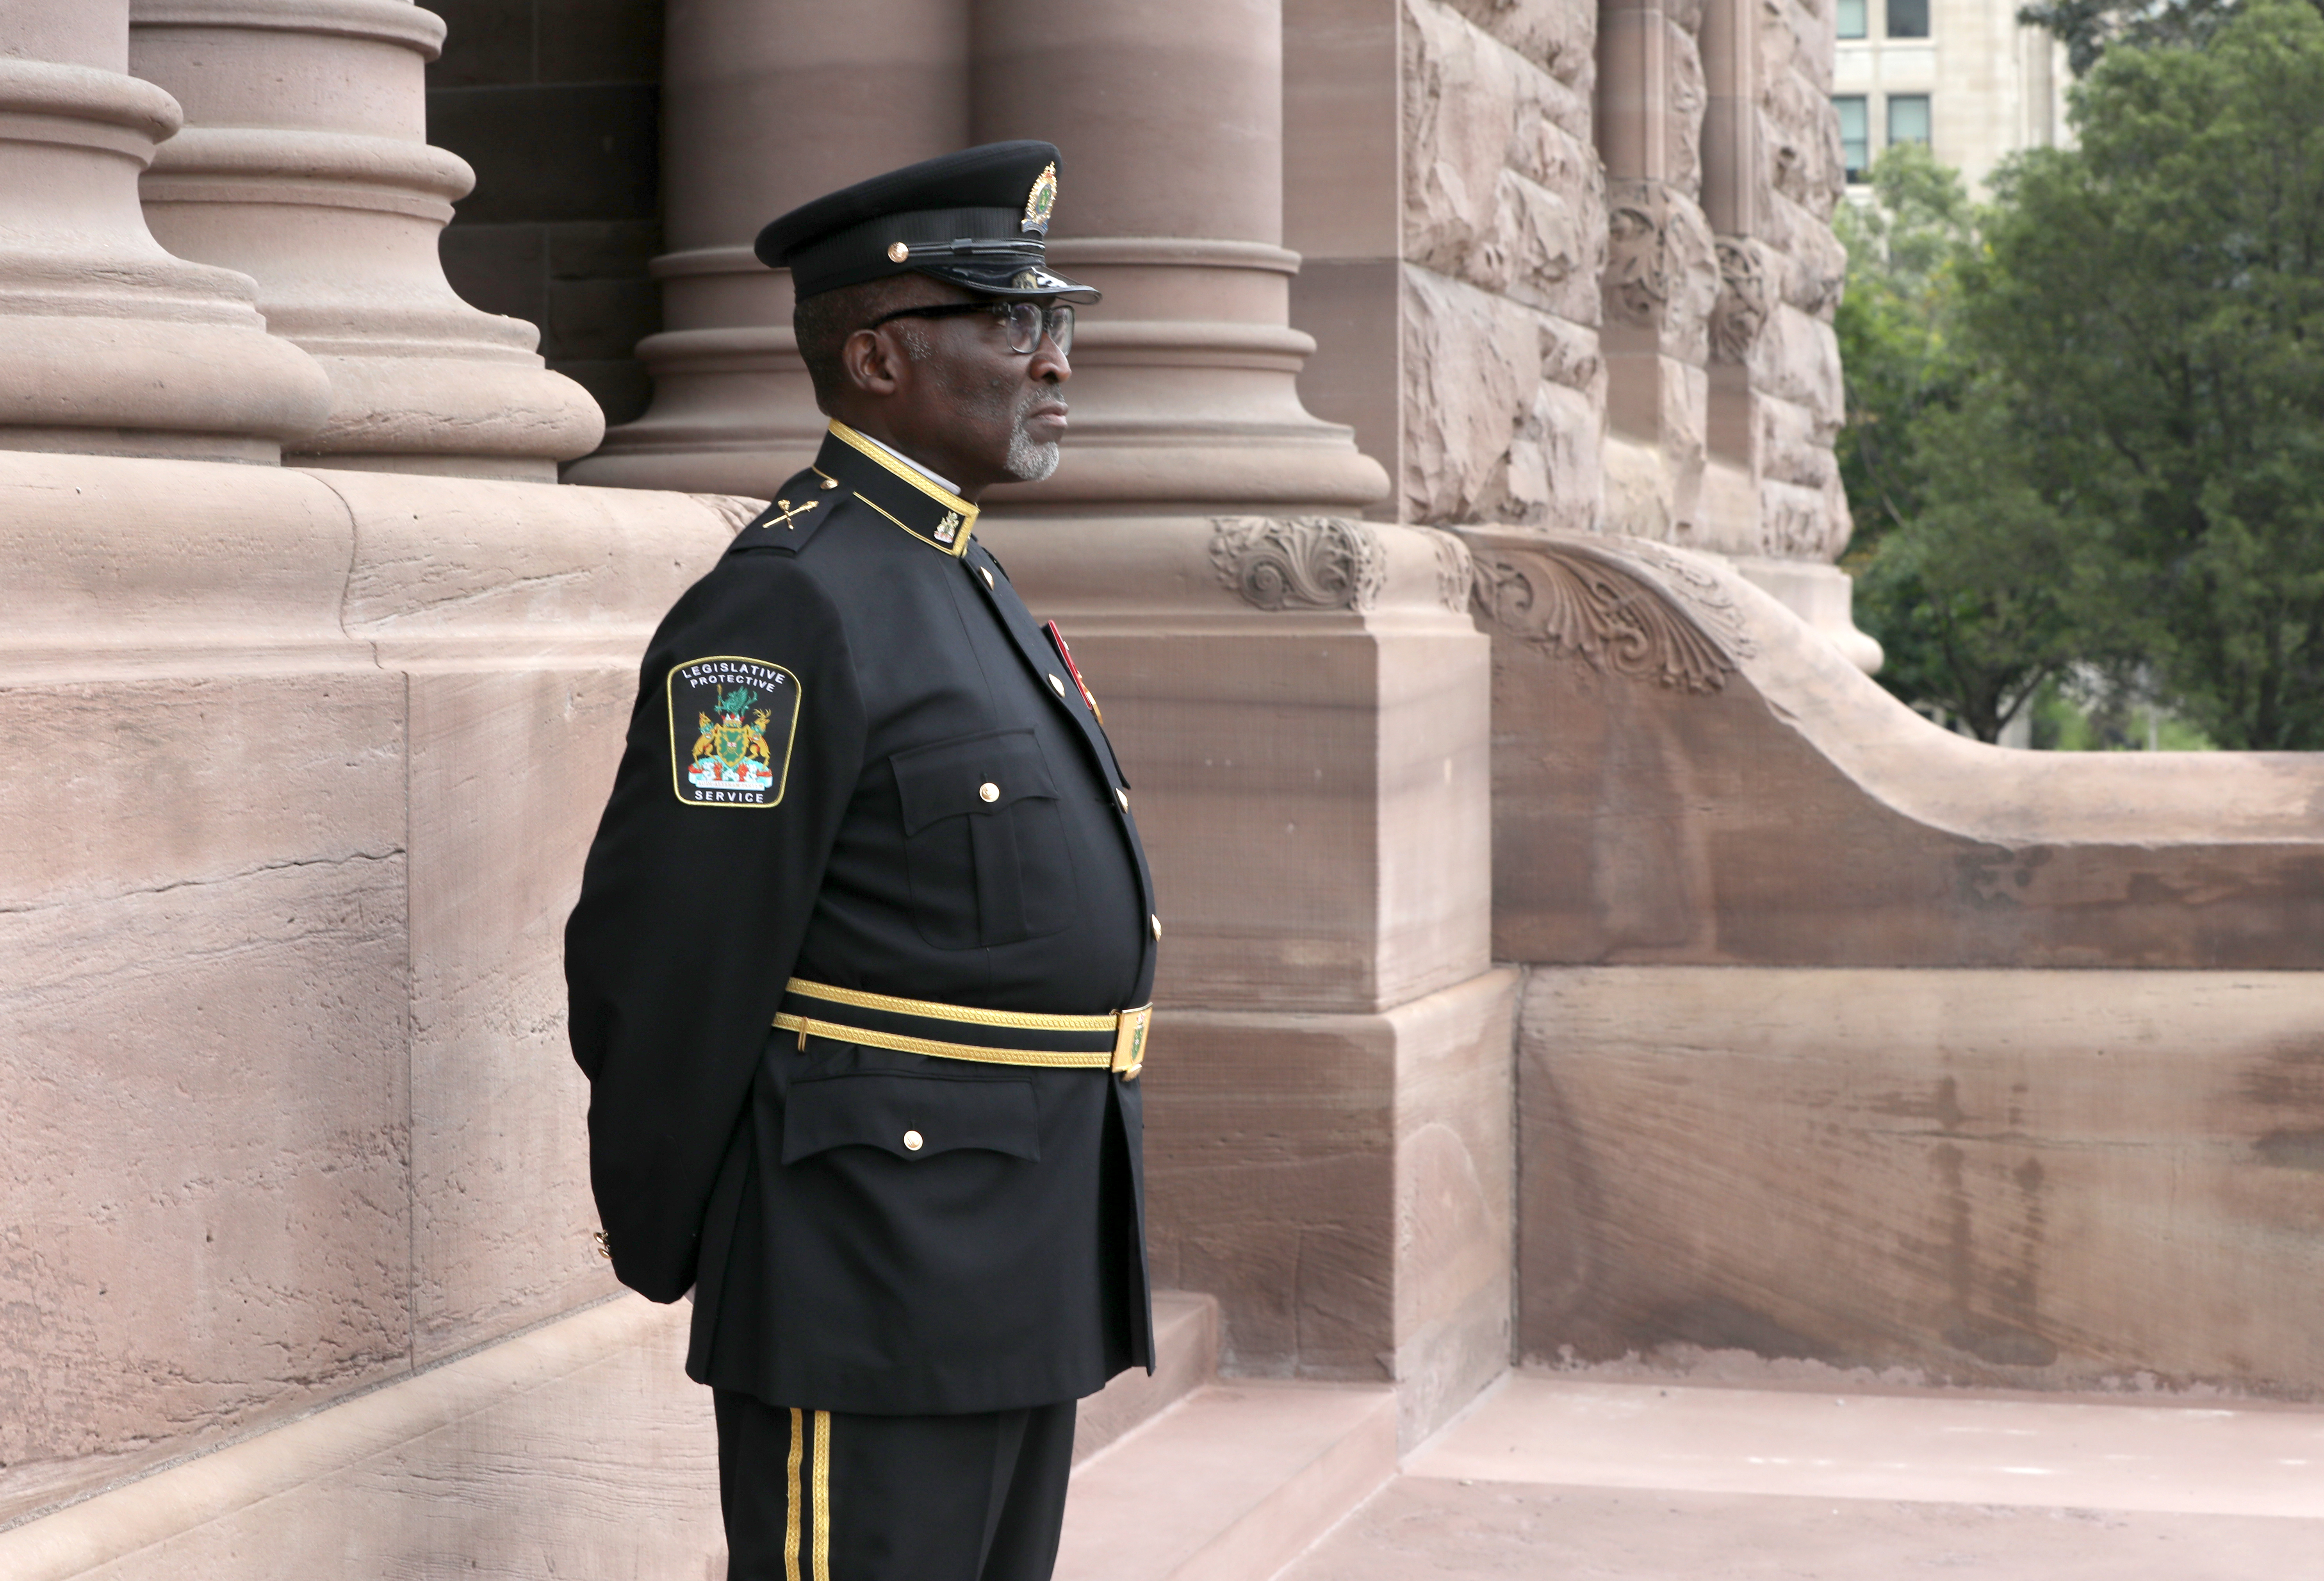 officer standing outside of building in ceremonial uniform